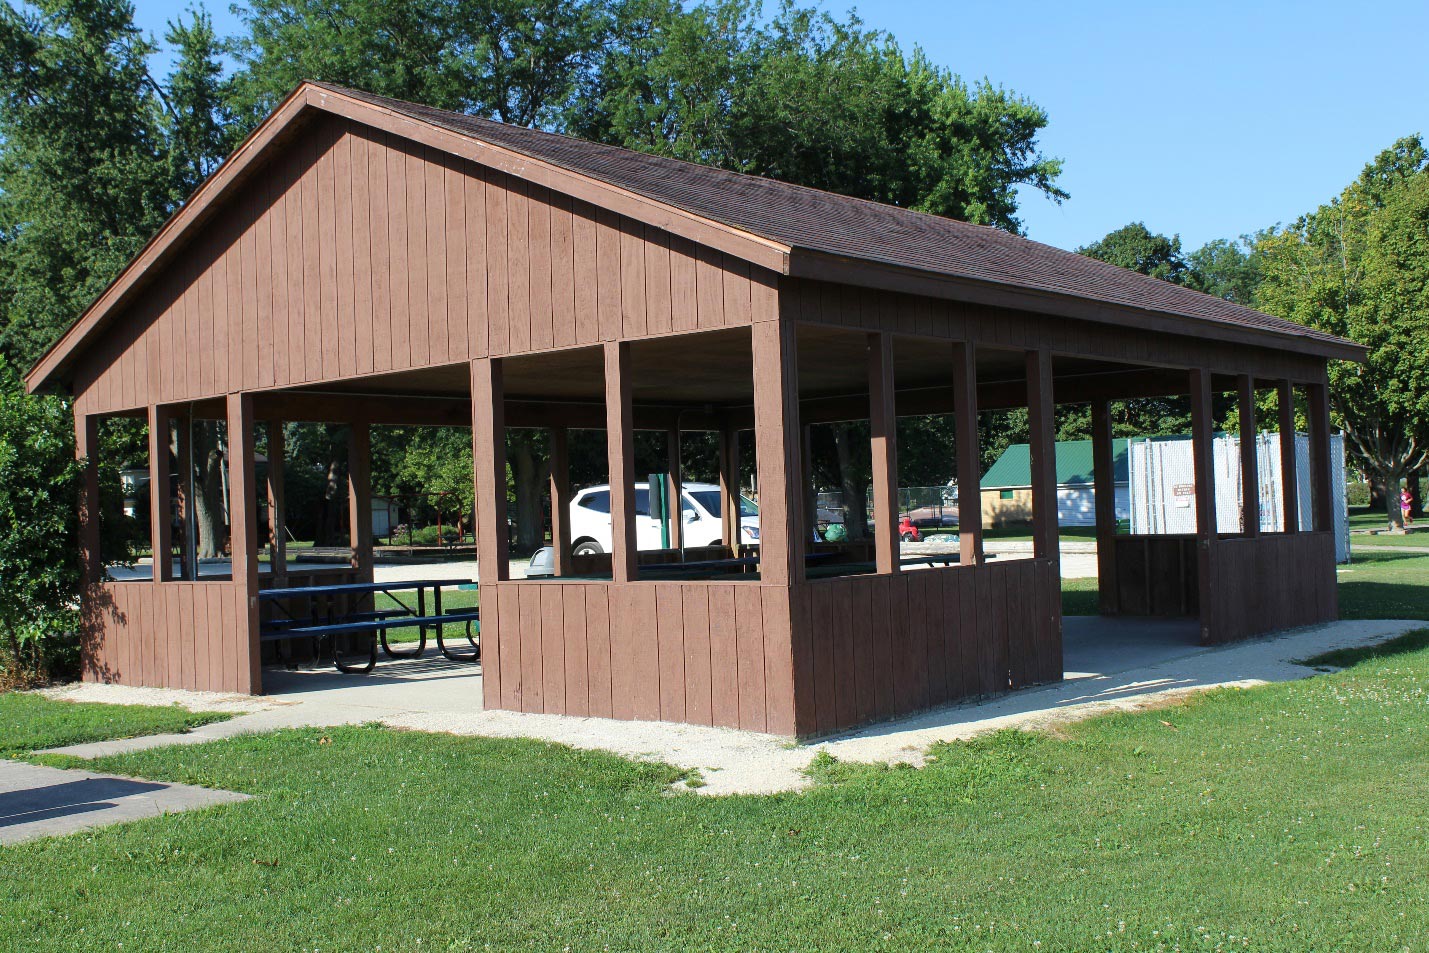 Chamberlain Park Picnic Shelter No. 1 (with-electric)